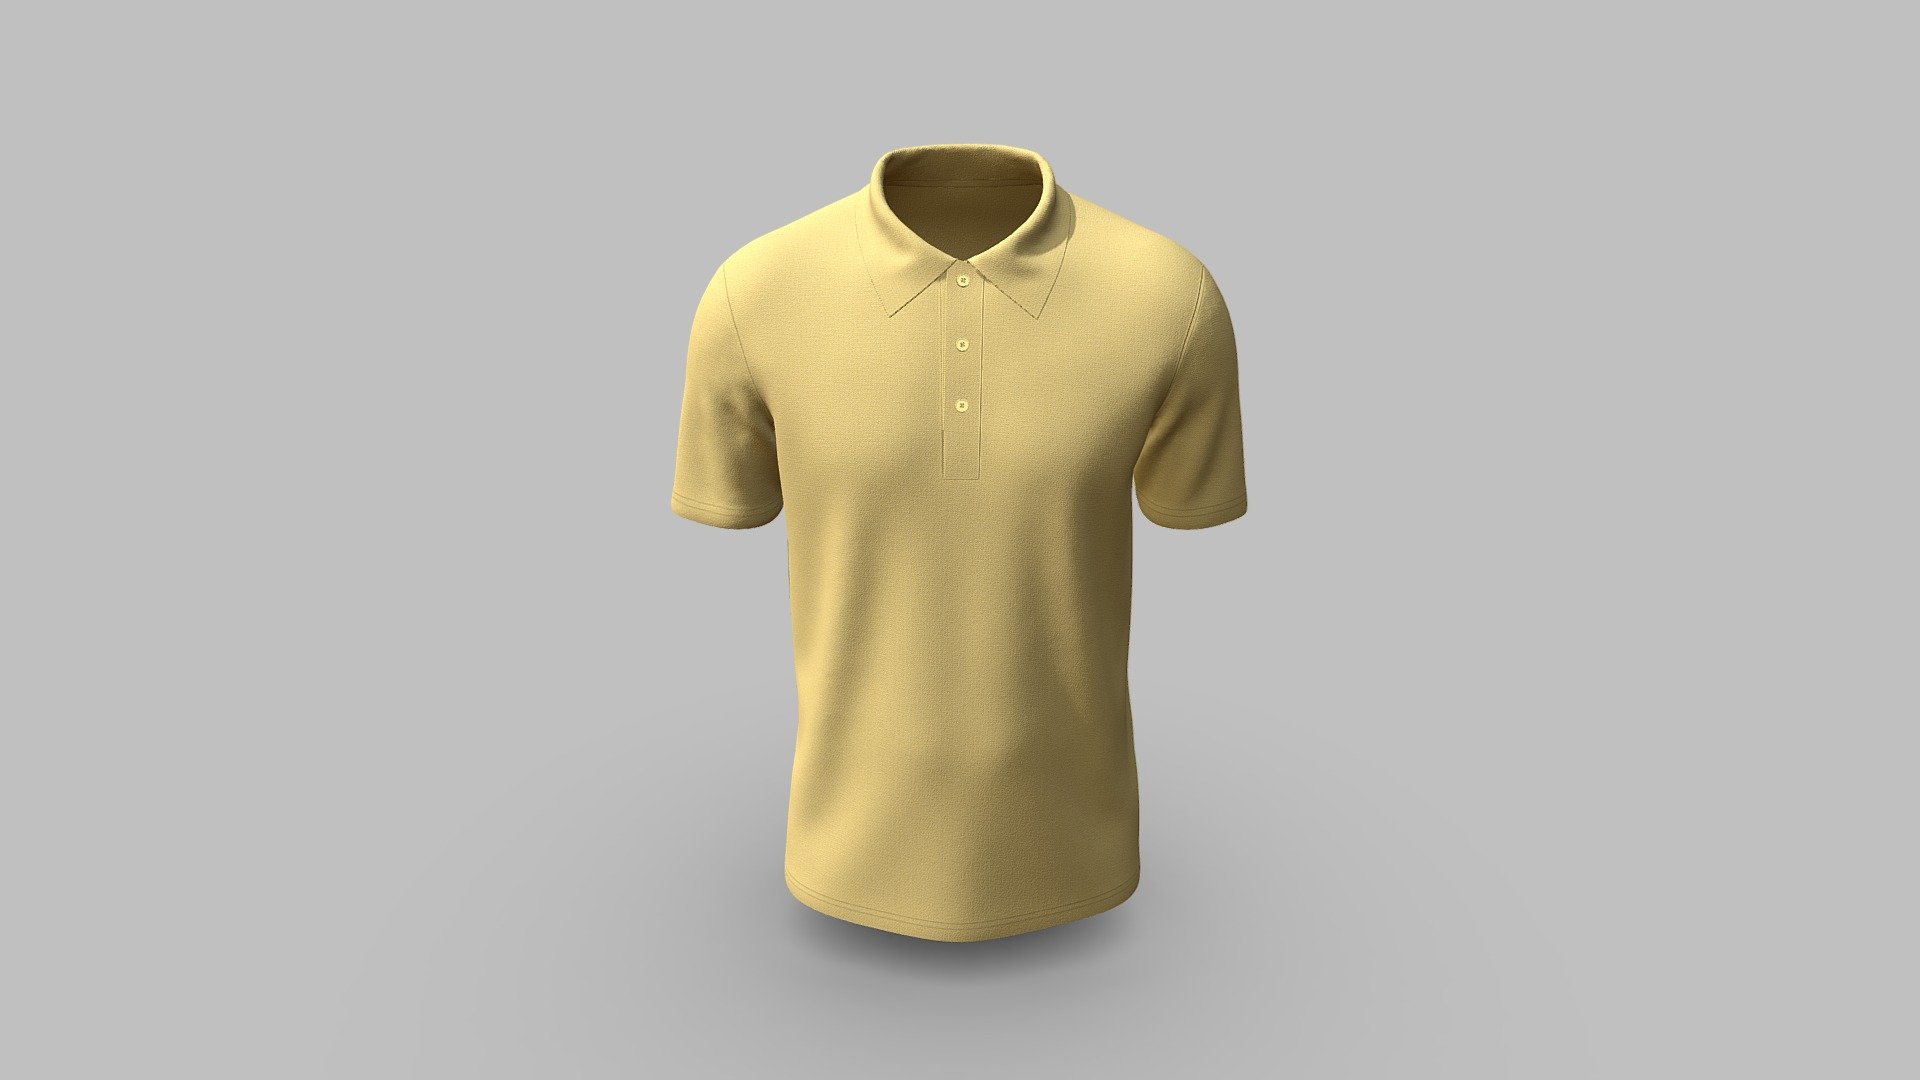 Cloth Title = Sustanable Ocean Split Neck Polo Design 

SKU = DG100145 

Category = Unisex 

Product Type = Polo 

Cloth Length = Regular 

Body Fit = Regular Fit 

Occasion = Casual  

Sleeve Style = Set In Sleeve 


Our Services:

3D Apparel Design.

OBJ,FBX,GLTF Making with High/Low Poly.

Fabric Digitalization.

Mockup making.

3D Teck Pack.

Pattern Making.

2D Illustration.

Cloth Animation and 360 Spin Video.


Contact us:- 

Email: info@digitalfashionwear.com 

Website: https://digitalfashionwear.com 


We designed all the types of cloth specially focused on product visualization, e-commerce, fitting, and production. 

We will design: 

T-shirts 

Polo shirts 

Hoodies 

Sweatshirt 

Jackets 

Shirts 

TankTops 

Trousers 

Bras 

Underwear 

Blazer 

Aprons 

Leggings 

and All Fashion items. 





Our goal is to make sure what we provide you, meets your demand 3d model